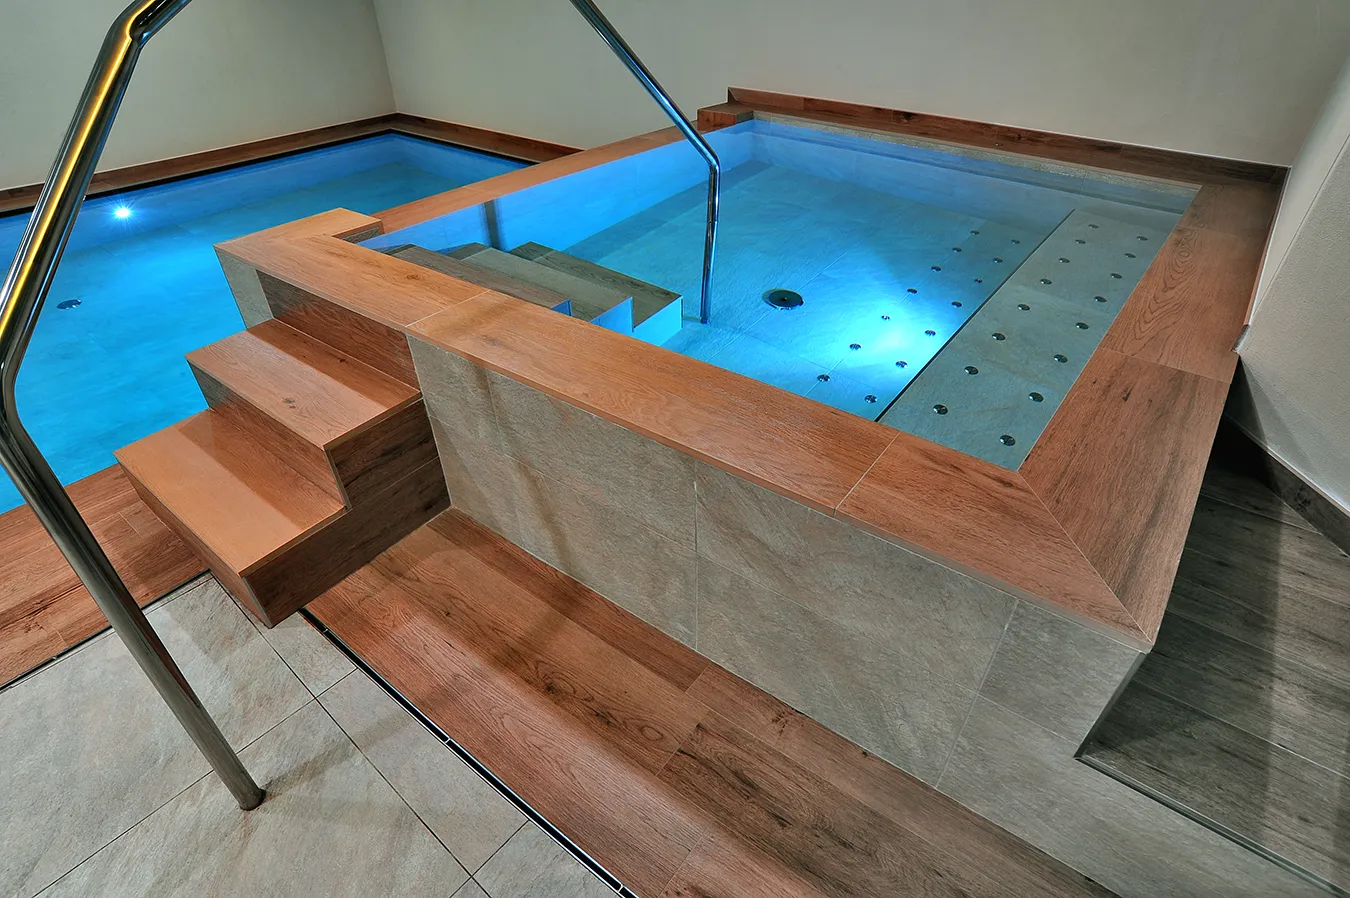 Sophisticated indoor hydrotherapy pool with wood-effect tiles from the Evoke collection, merging elegance with functionality in a wellness environment.